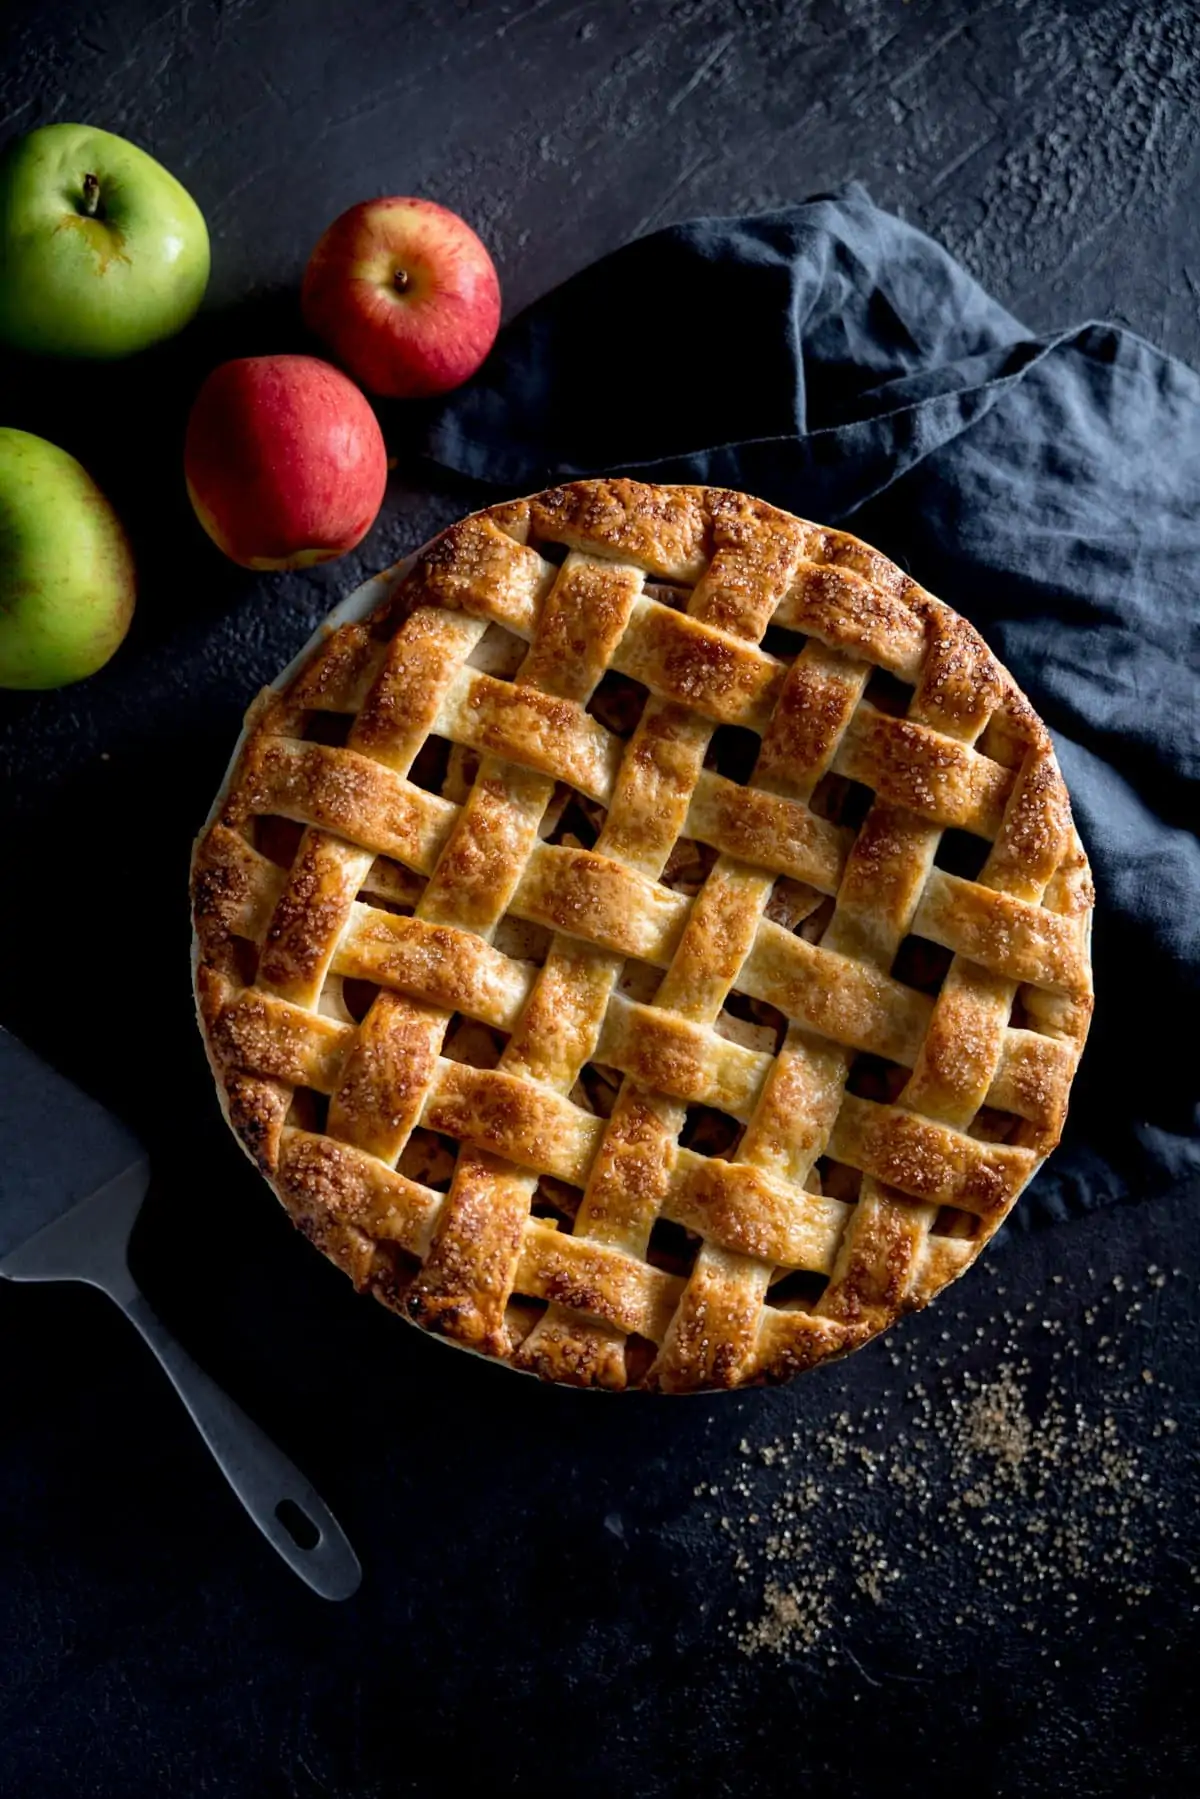 A photo looking down on a perfectly round golden brown lattice topped deep dish apple pie, with apples in the back ground, a blue tea towel and and a spoon next to the dish.